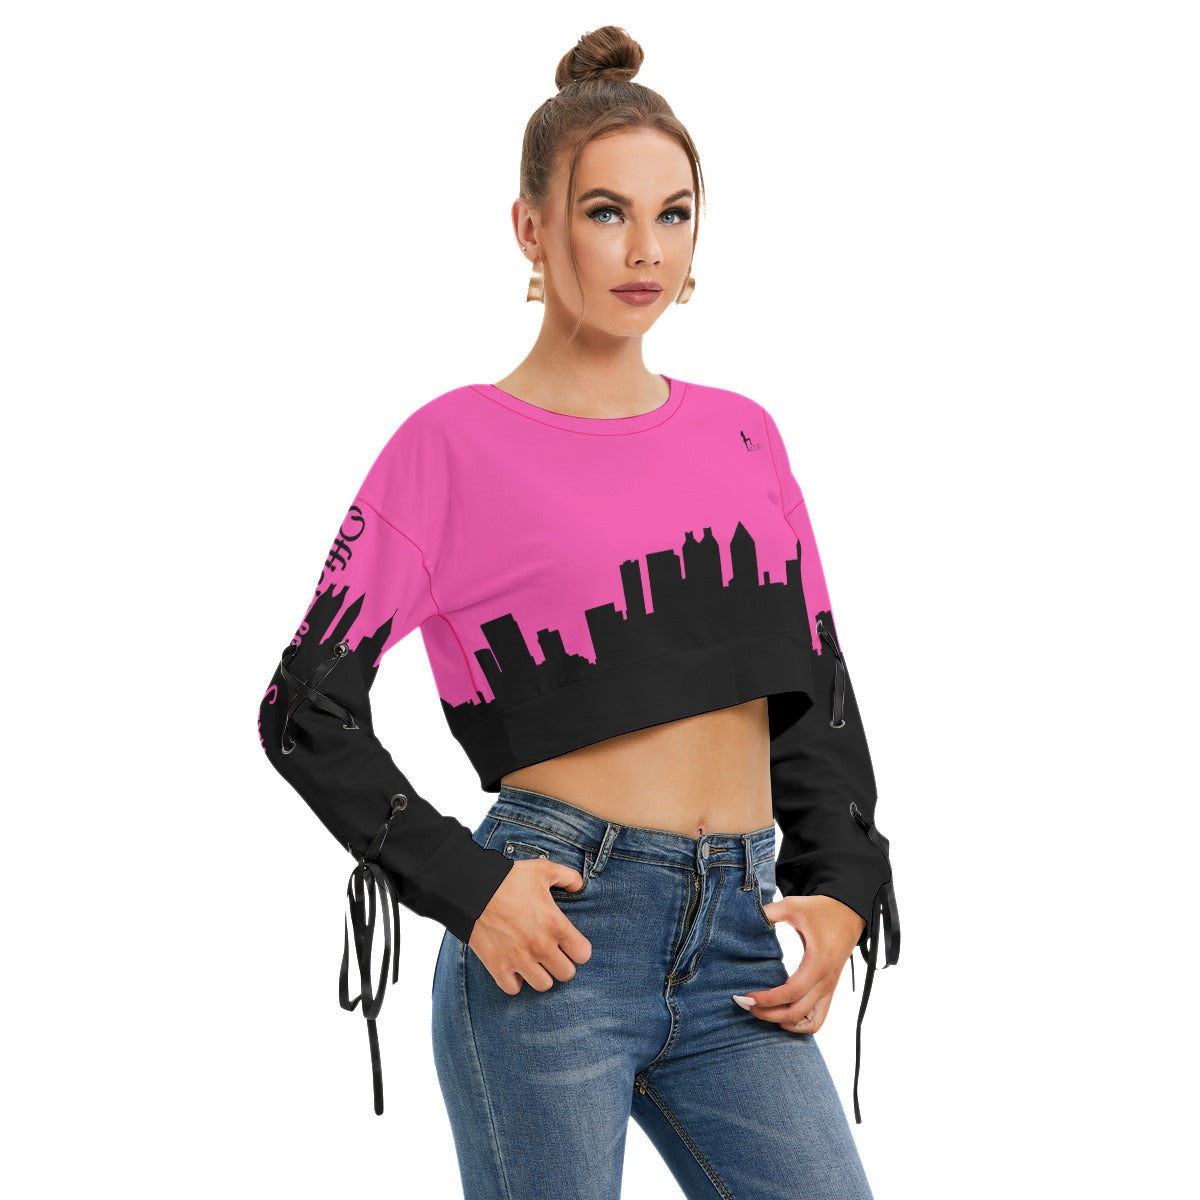 Officially Sexy Neon Pink & Black Skyline Collection Women's Long Lace up Sleeve Cropped Sweatshirt